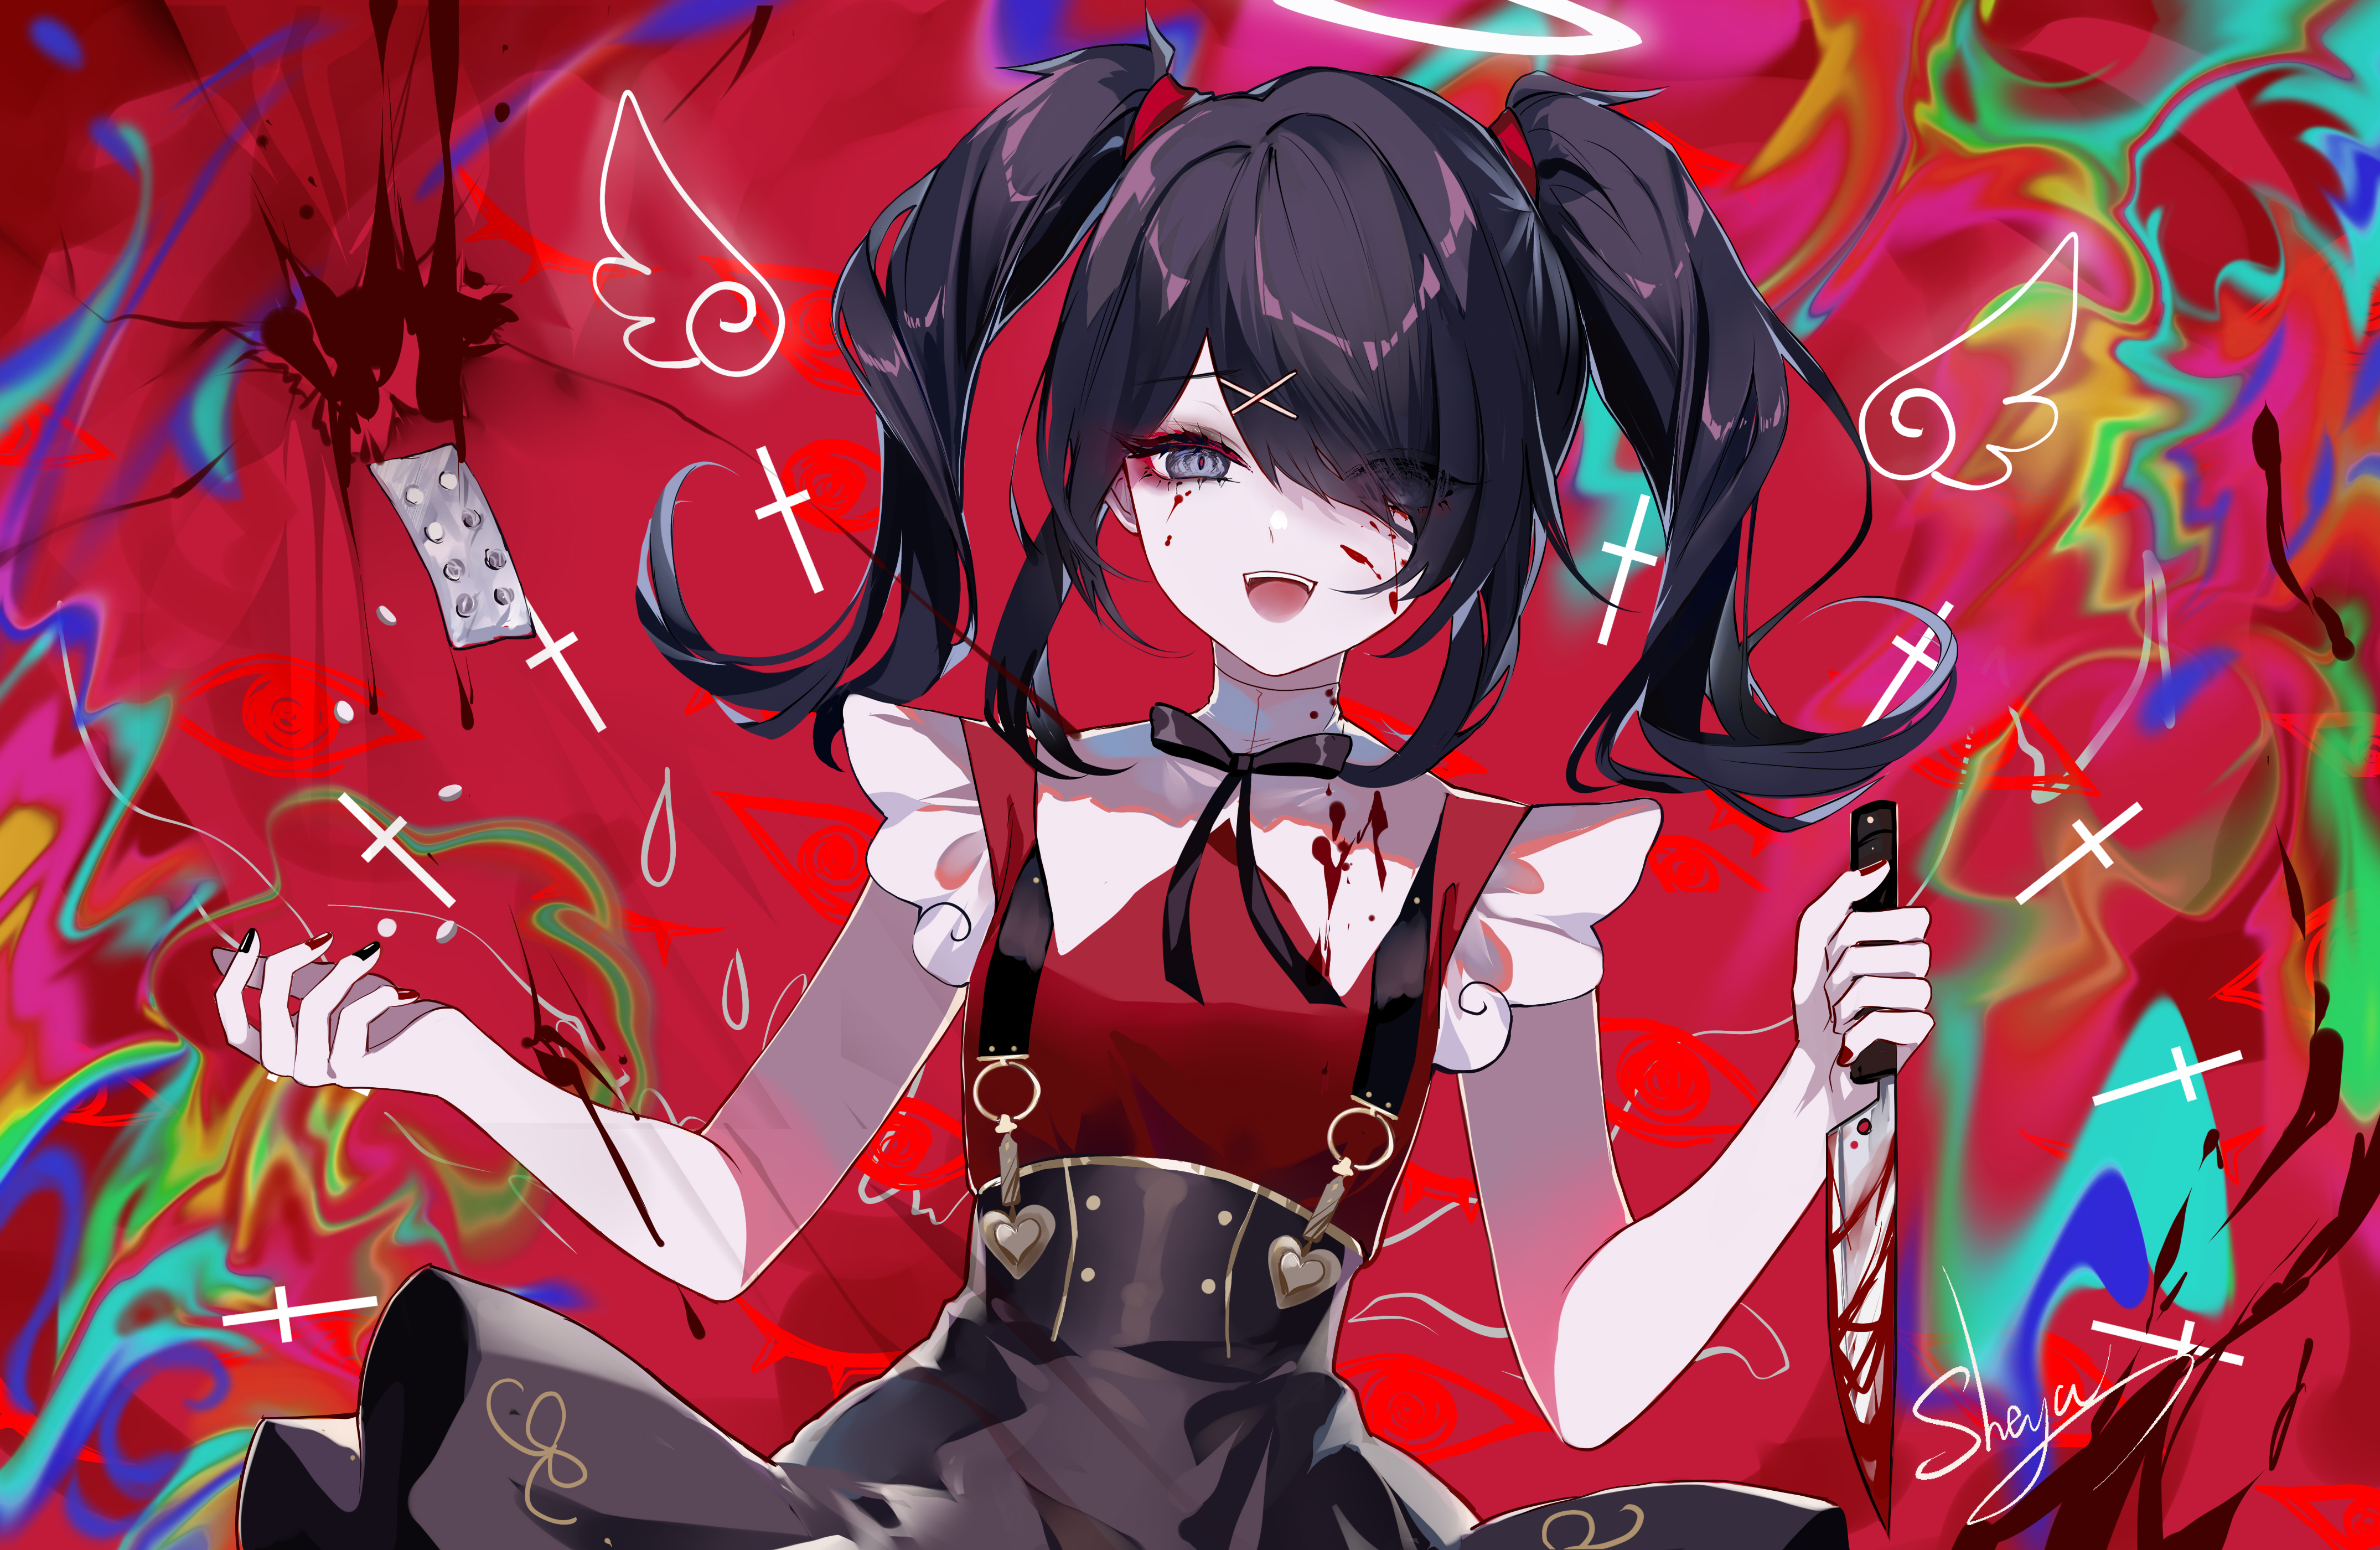 Anime Anime Girls Red Background Knife Pills Painted Nails Hair In Face Dark Hair Looking At Viewer  4300x2800